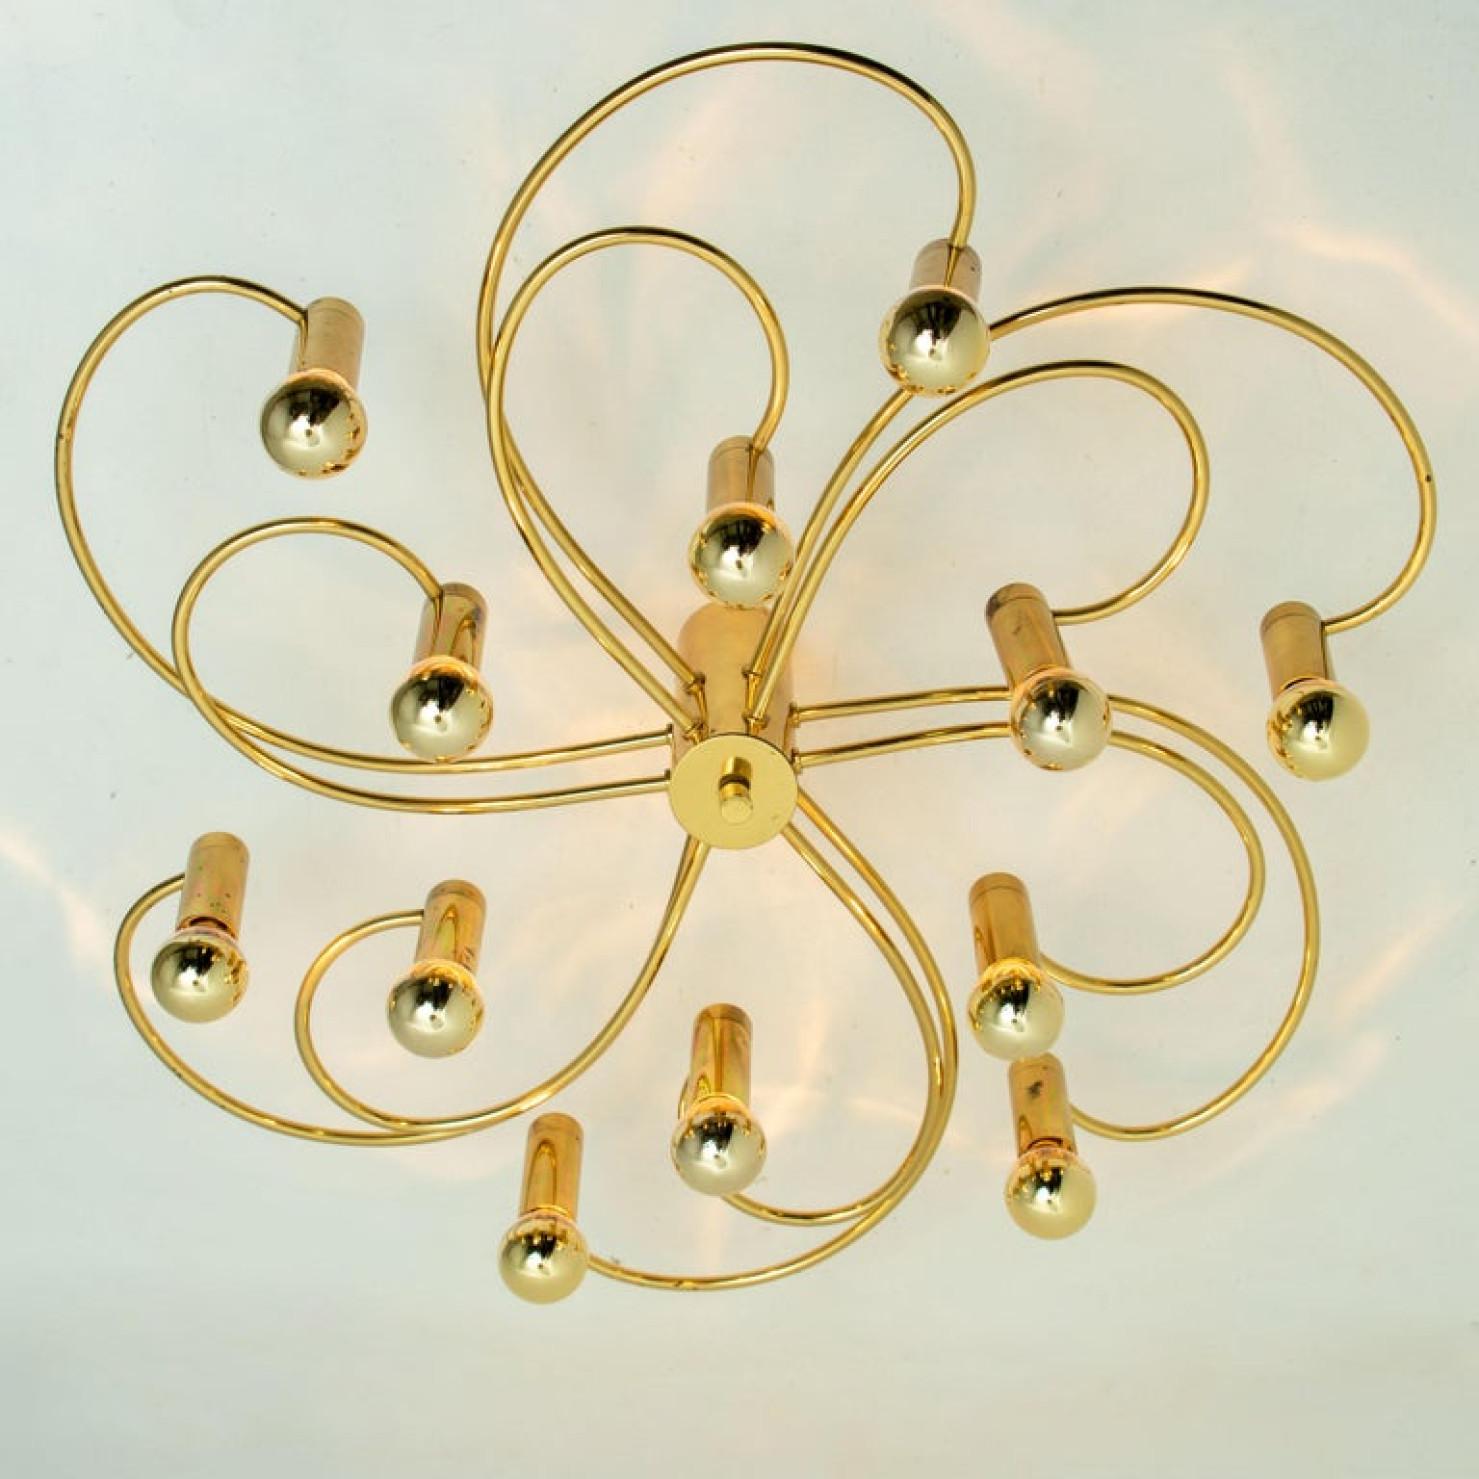 1 of the 2 Leola Sculptural Brass 13-Light Ceiling or Wall Flush Mount, 1970s For Sale 9